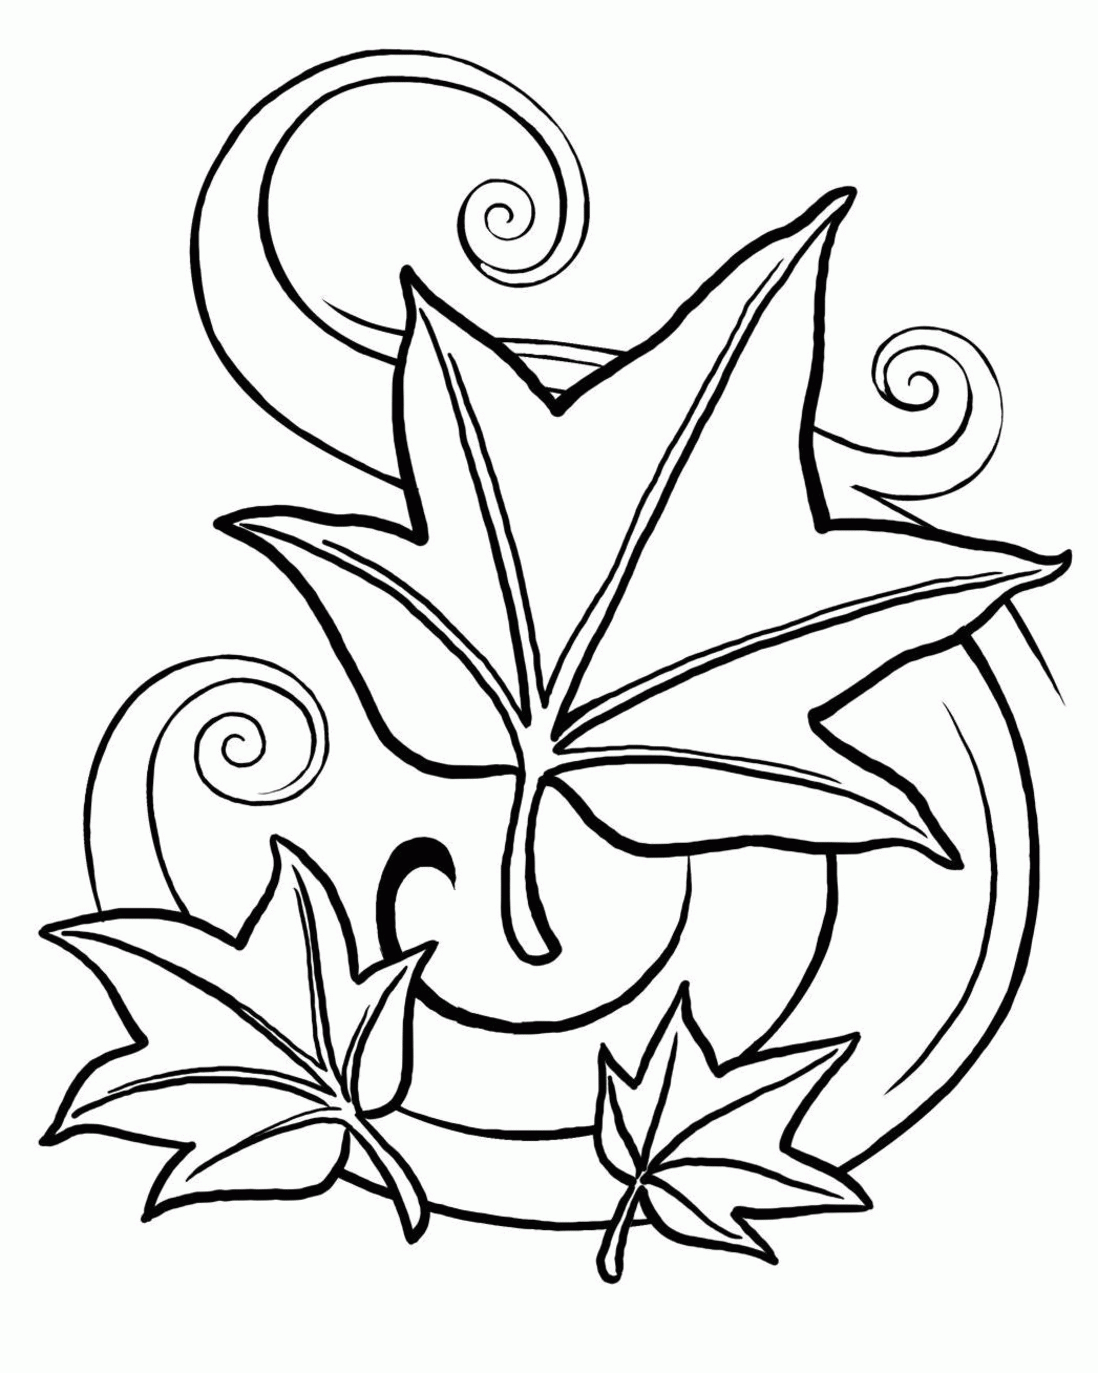 Fall Themed Coloring Pictures - High Quality Coloring Pages